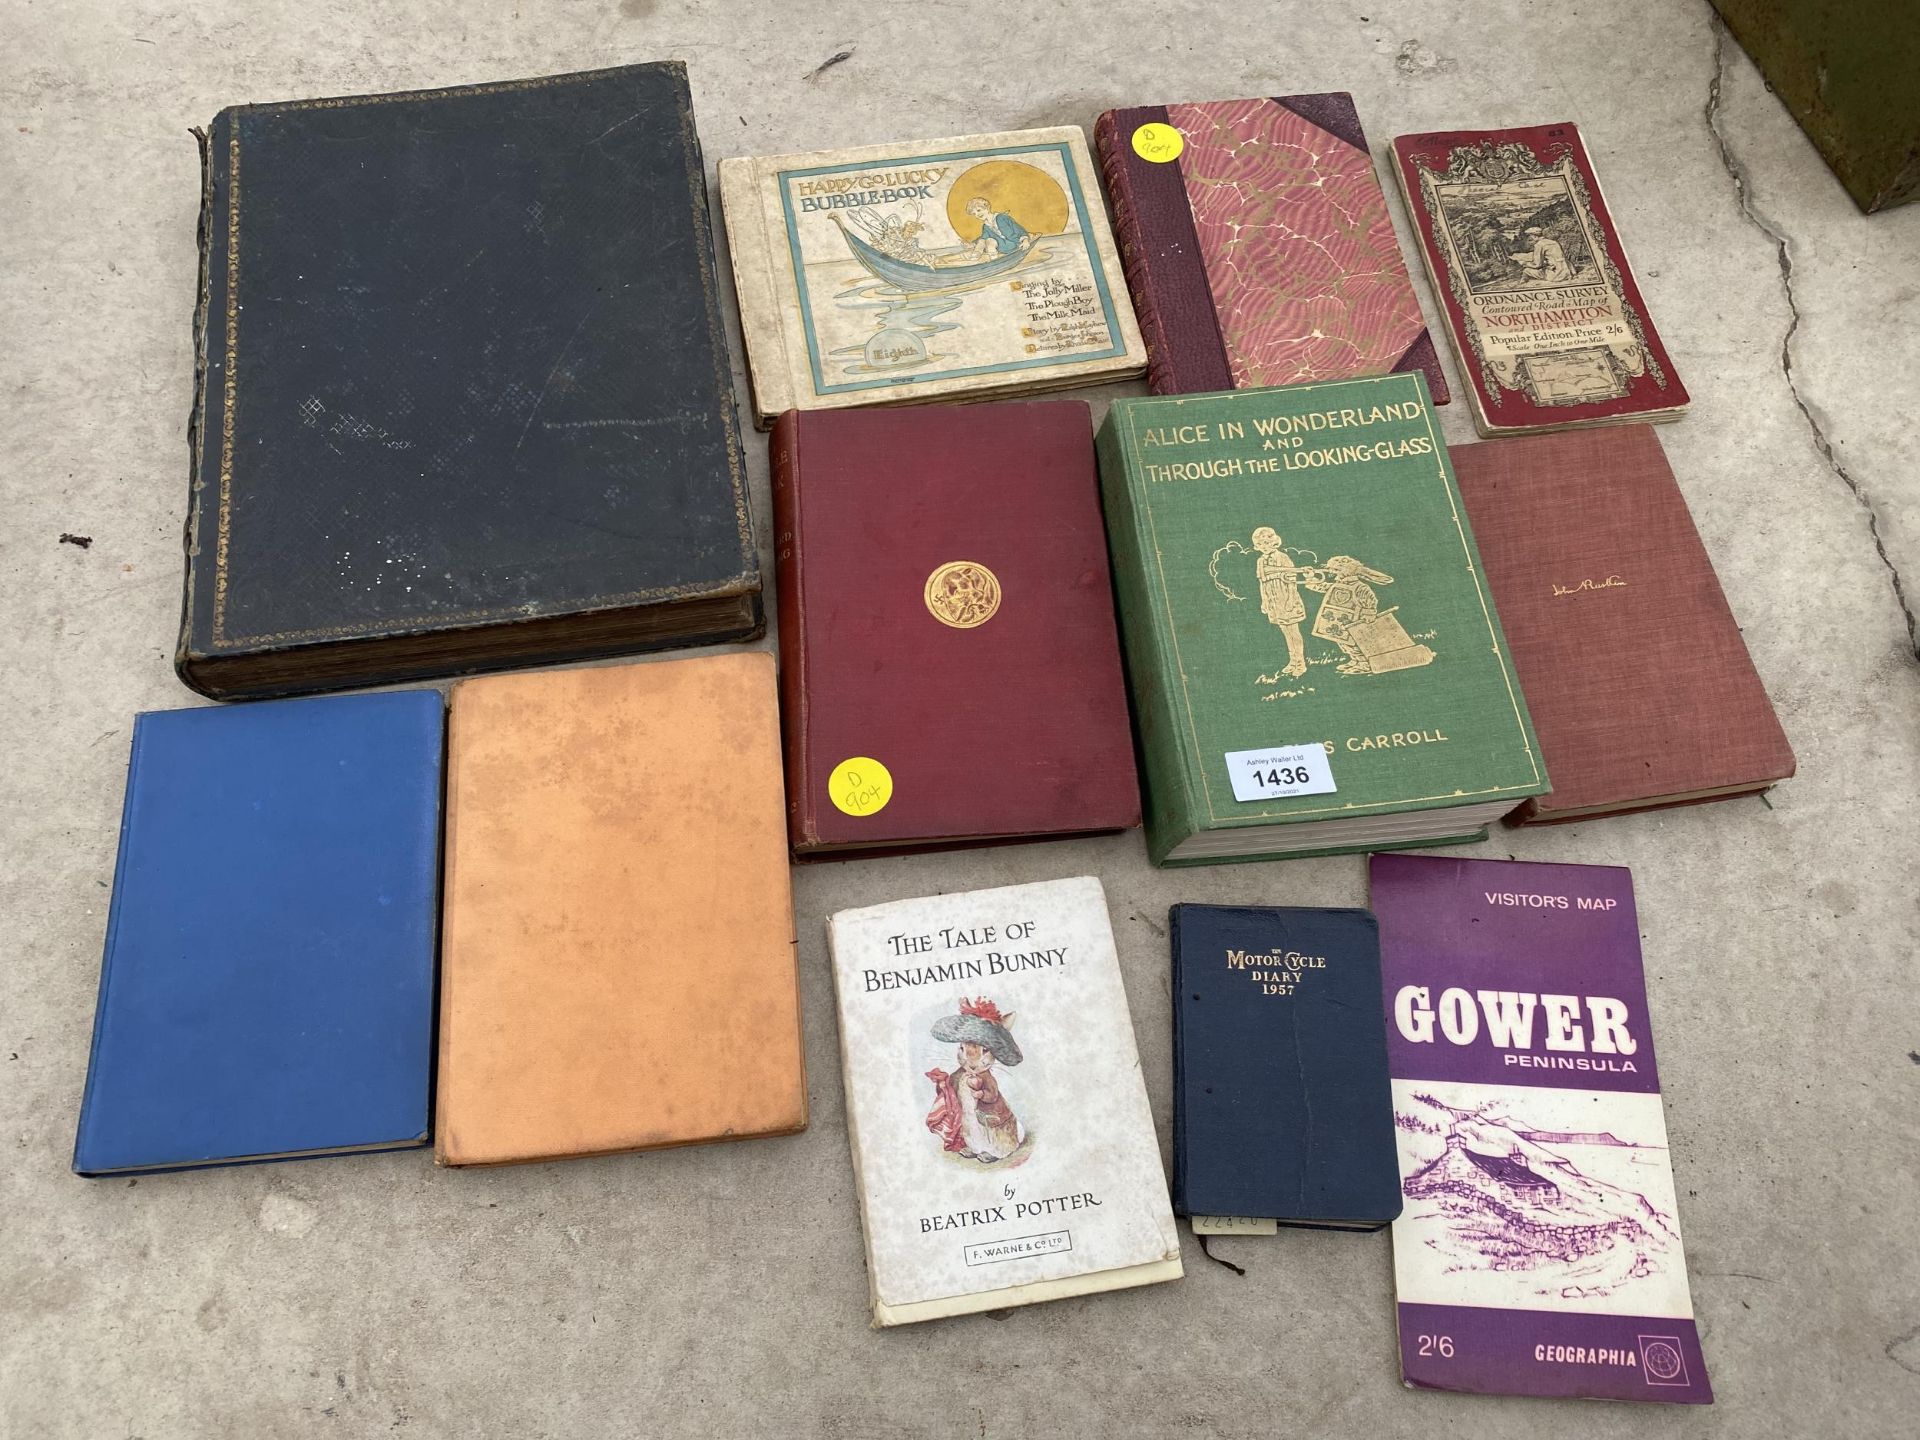 AN ASSORTMENT OF VINTAGE BOOKS TO INCLUDE LEWIS CARROLL ALICE IN WONDERLAND AND BEATRIX POTTER ETC